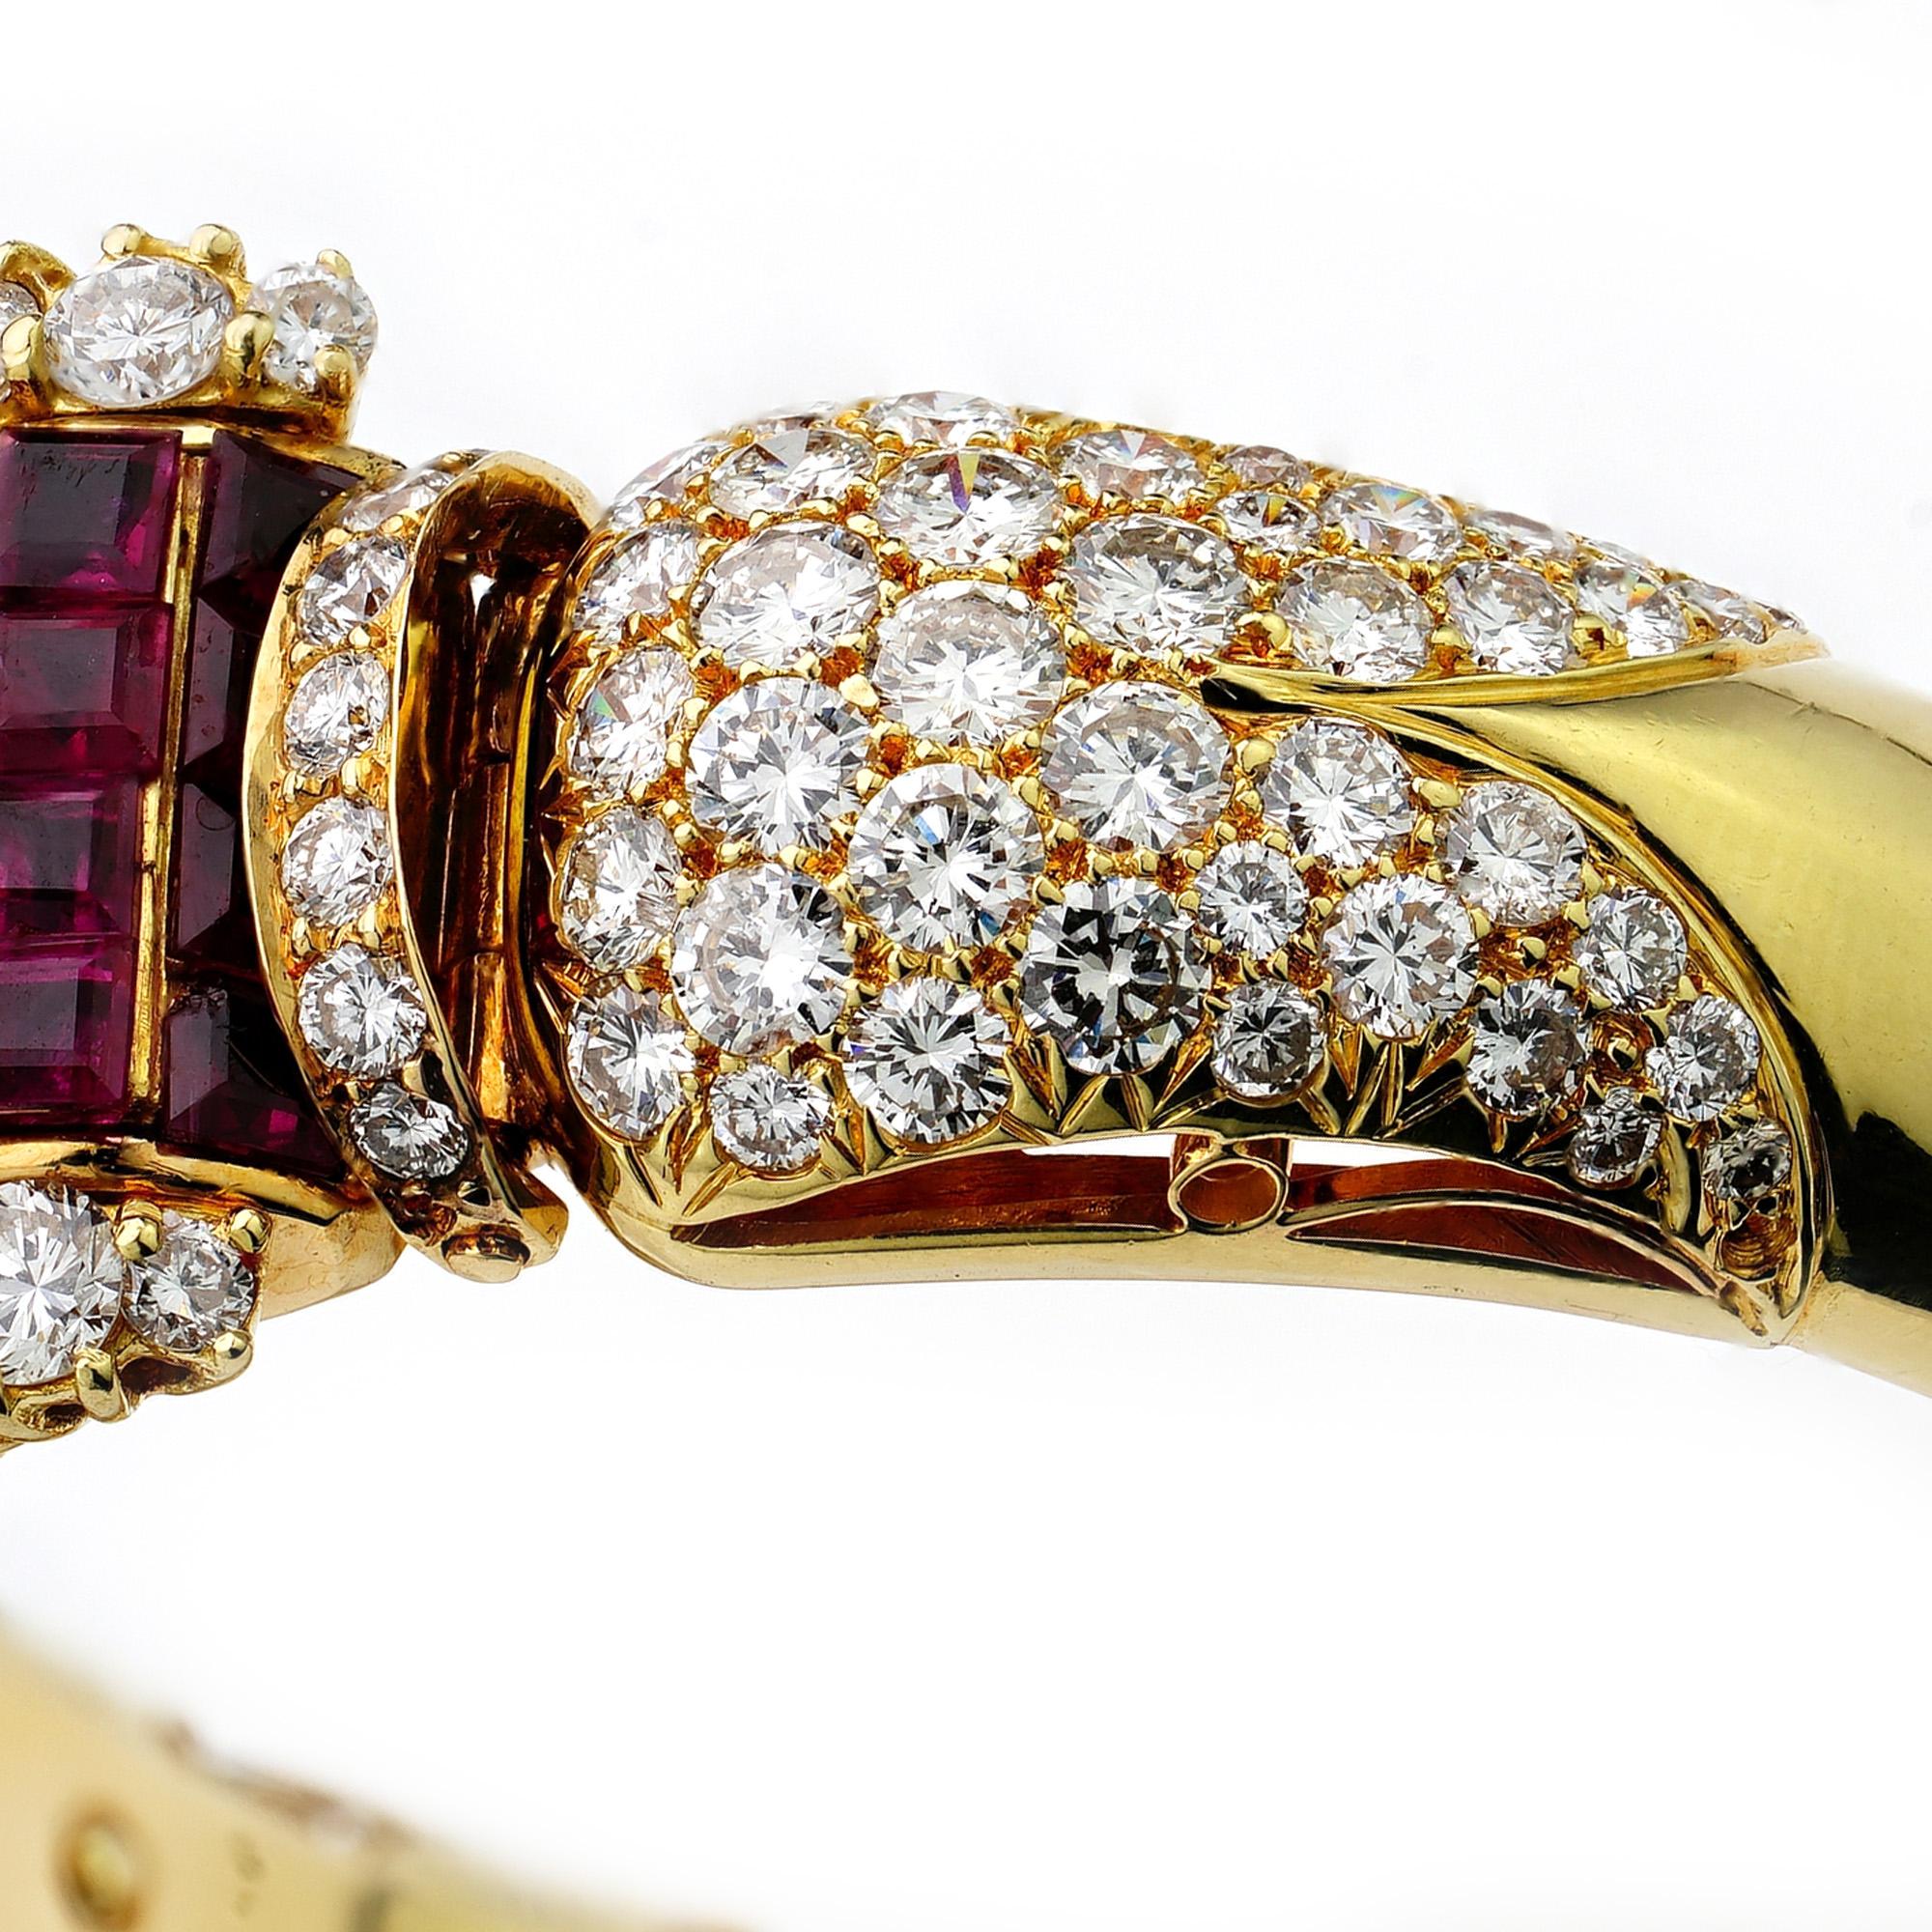 14kt. Yellow Gold Bangle Set with 18 Ct. Rubies and 12.84 Ct. Diamonds For Sale 1